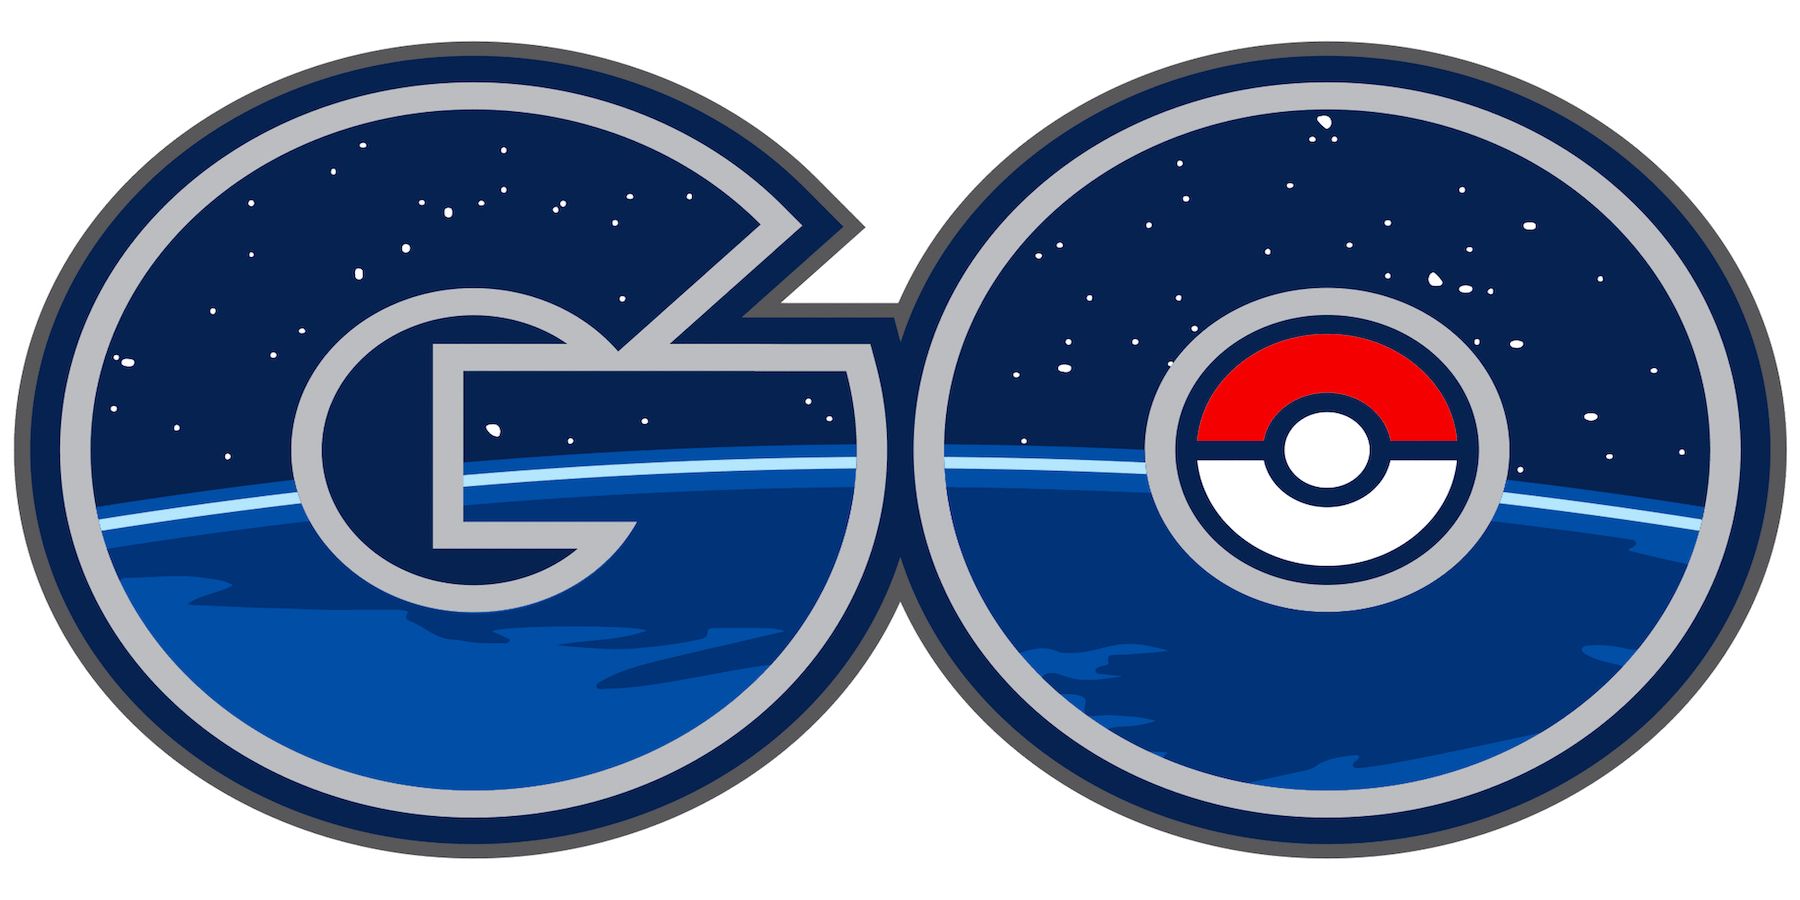 pokemon-go-logo-but-its-just-the-go